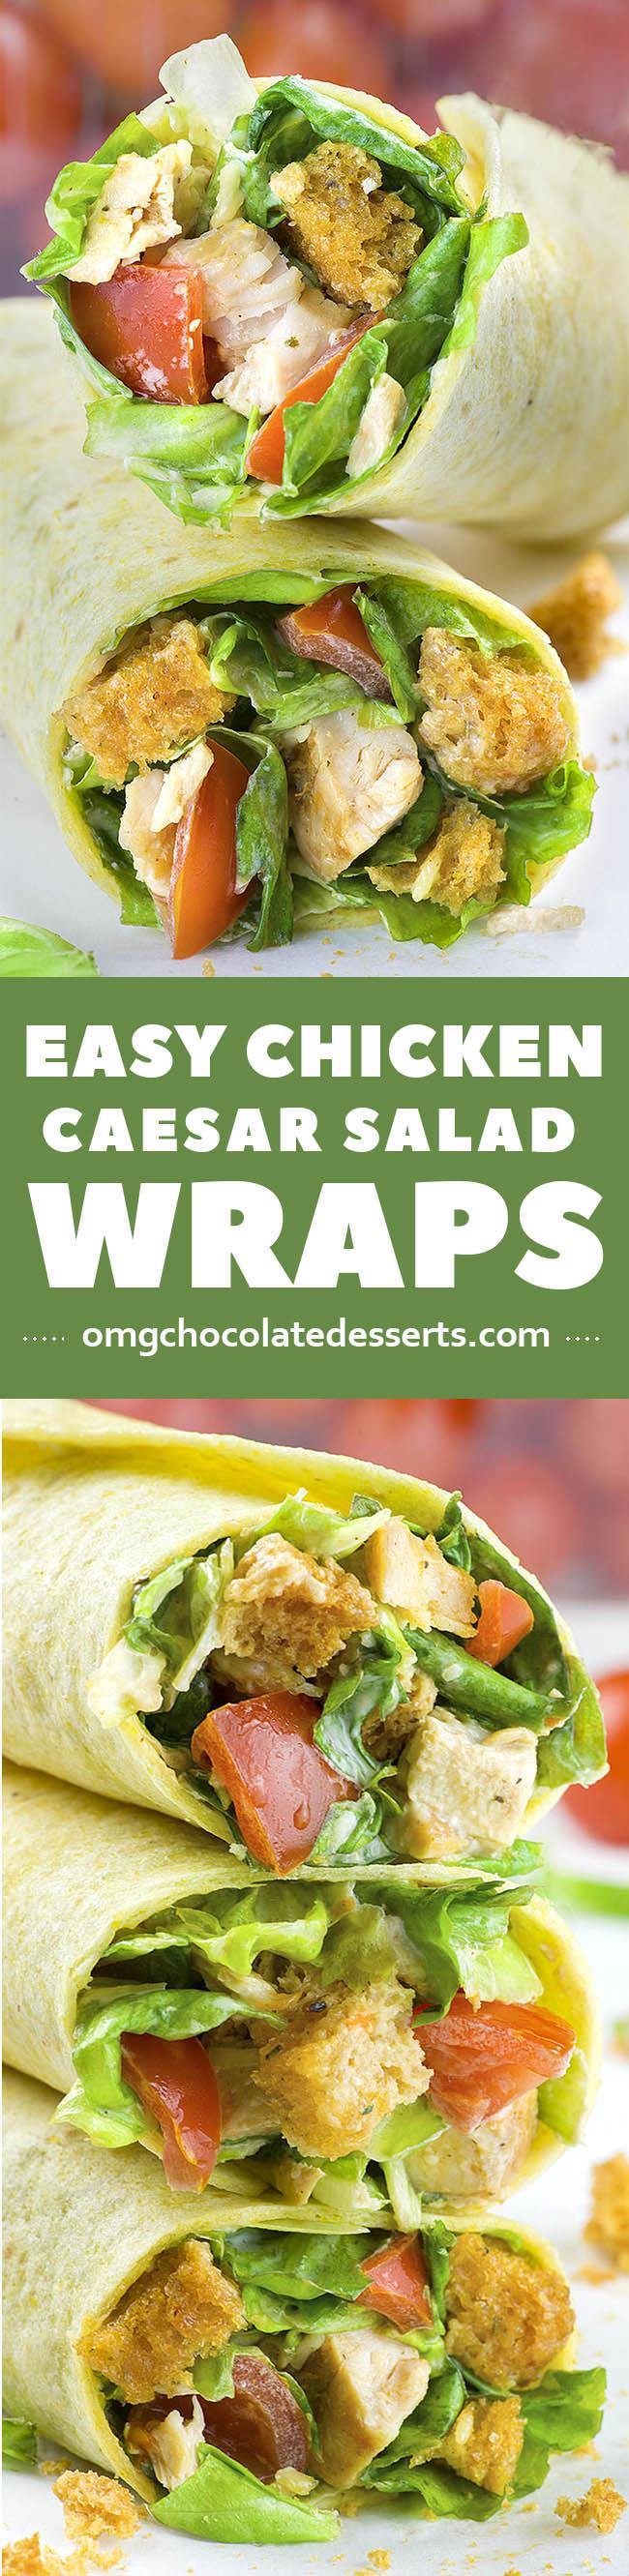 Chicken Caesar Salad Wraps are quick and easy chicken recipe that will show you how to turn healthy chicken salad into the best homemade weeknight dinner.